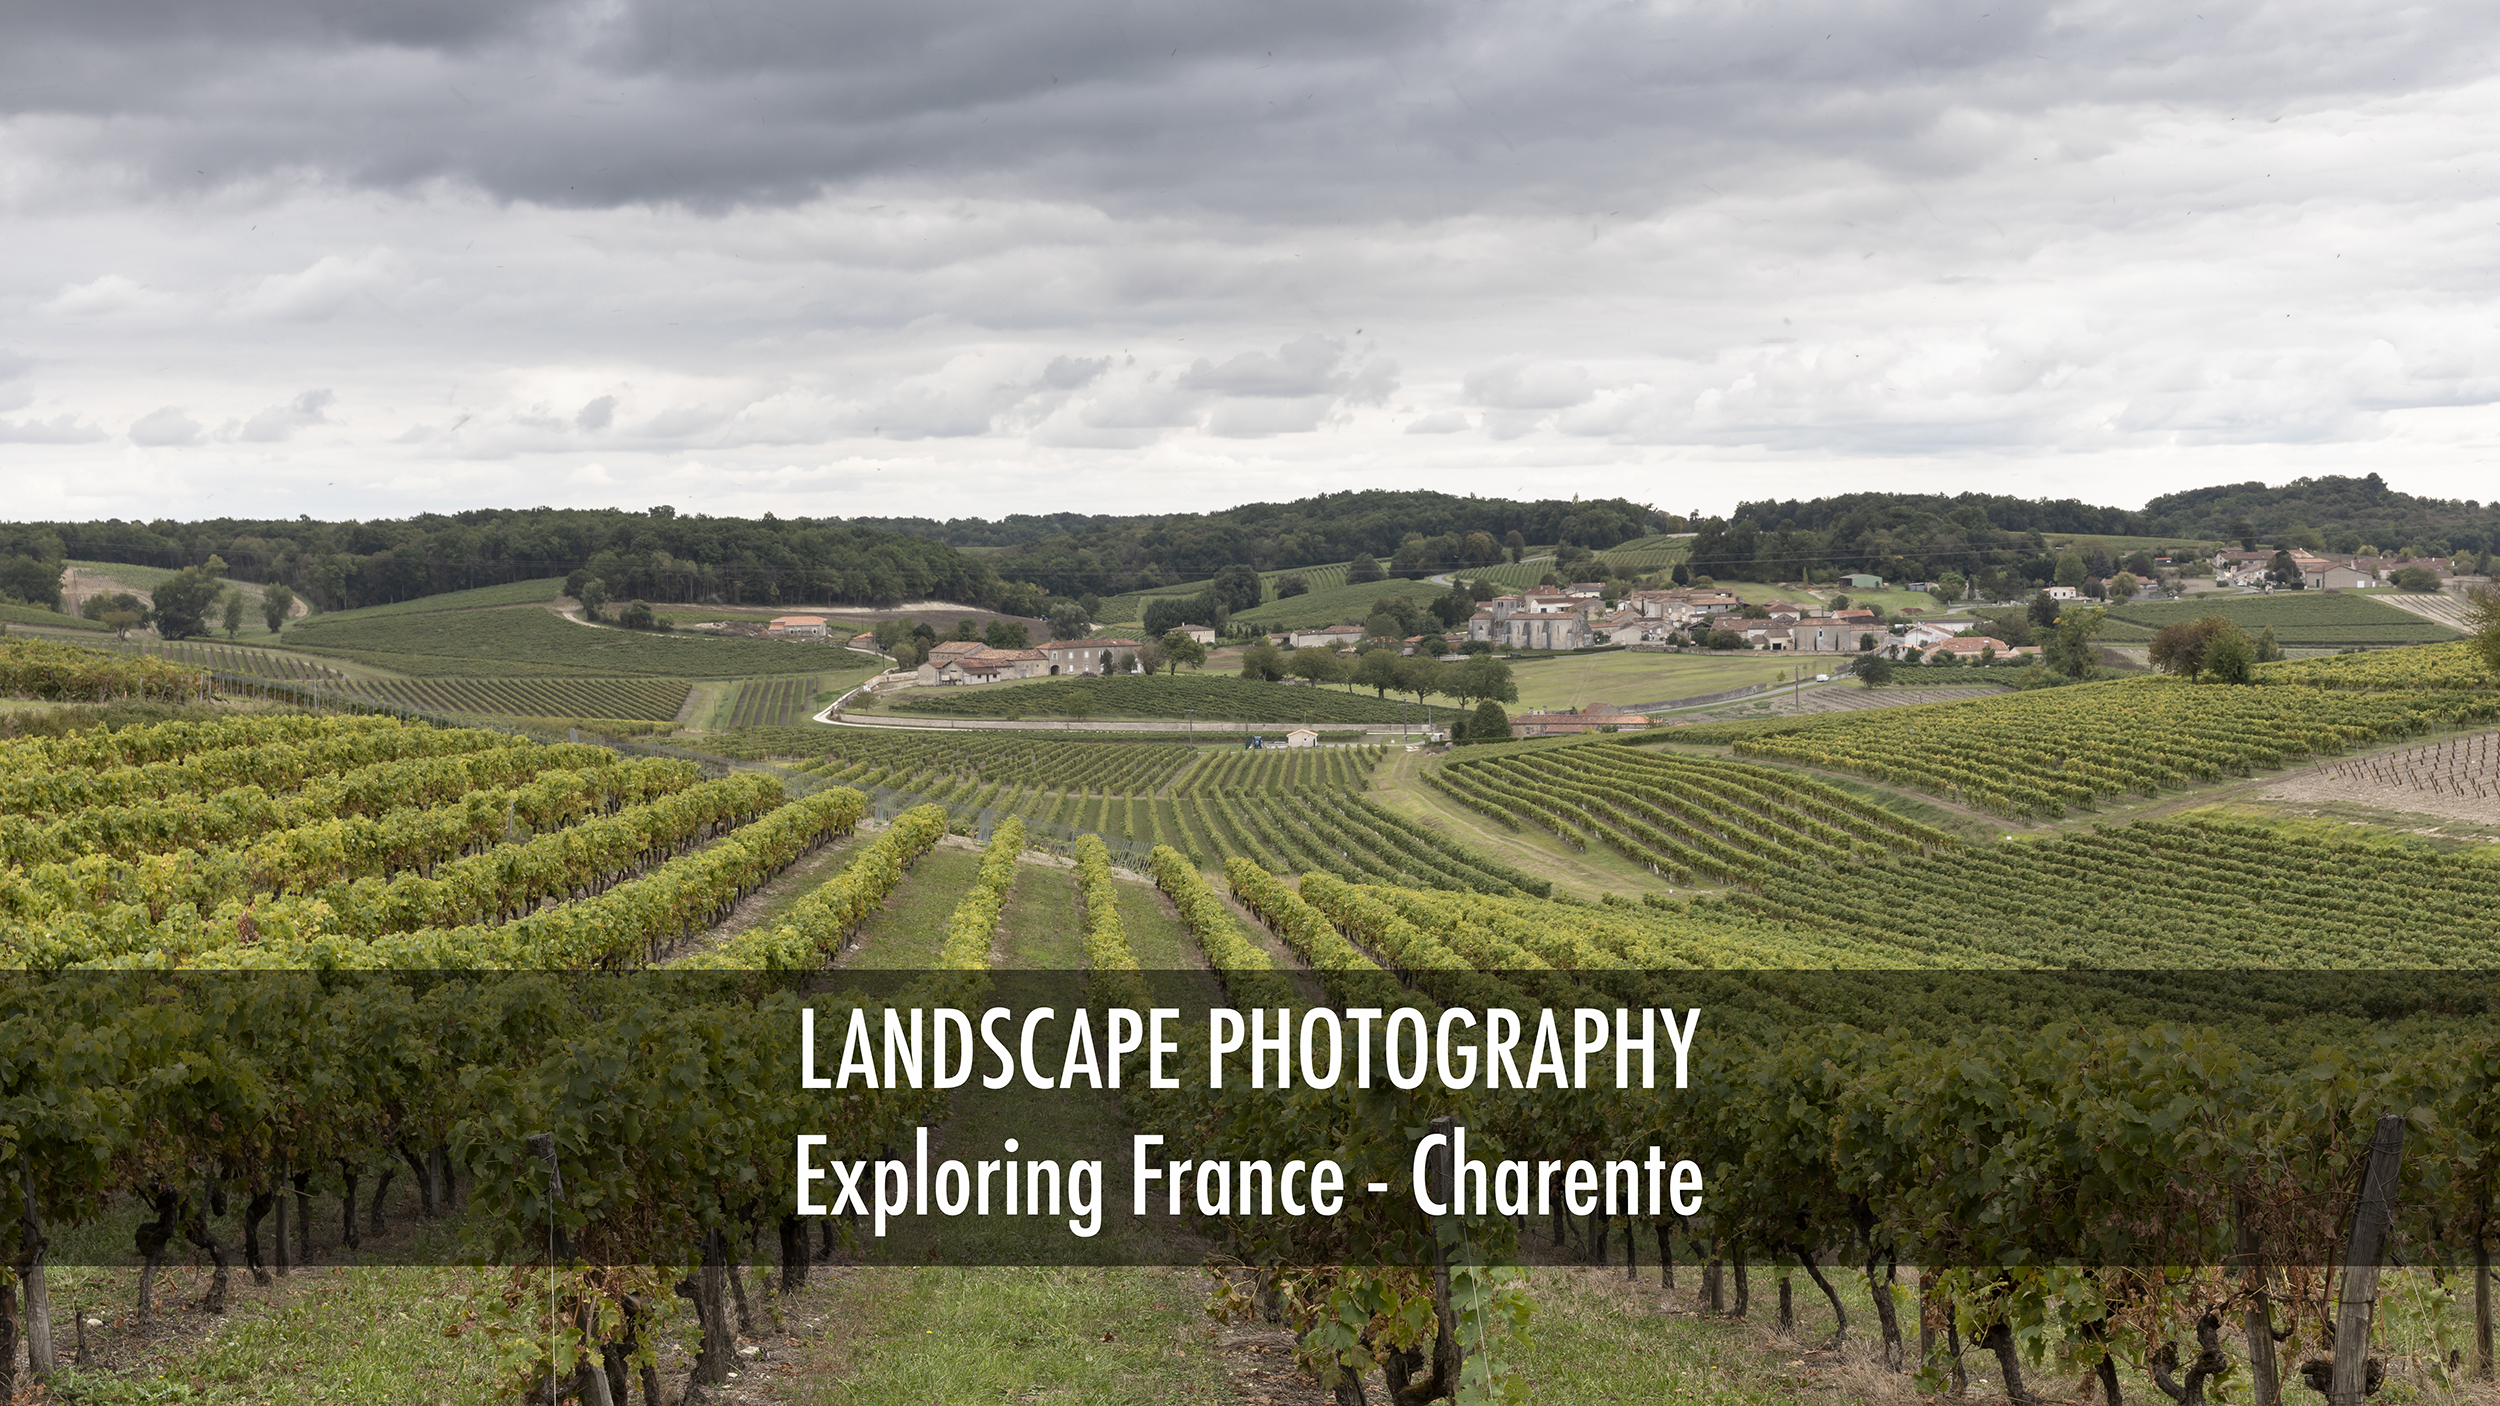 Exploring France in the department of Charente. Landscape photography.